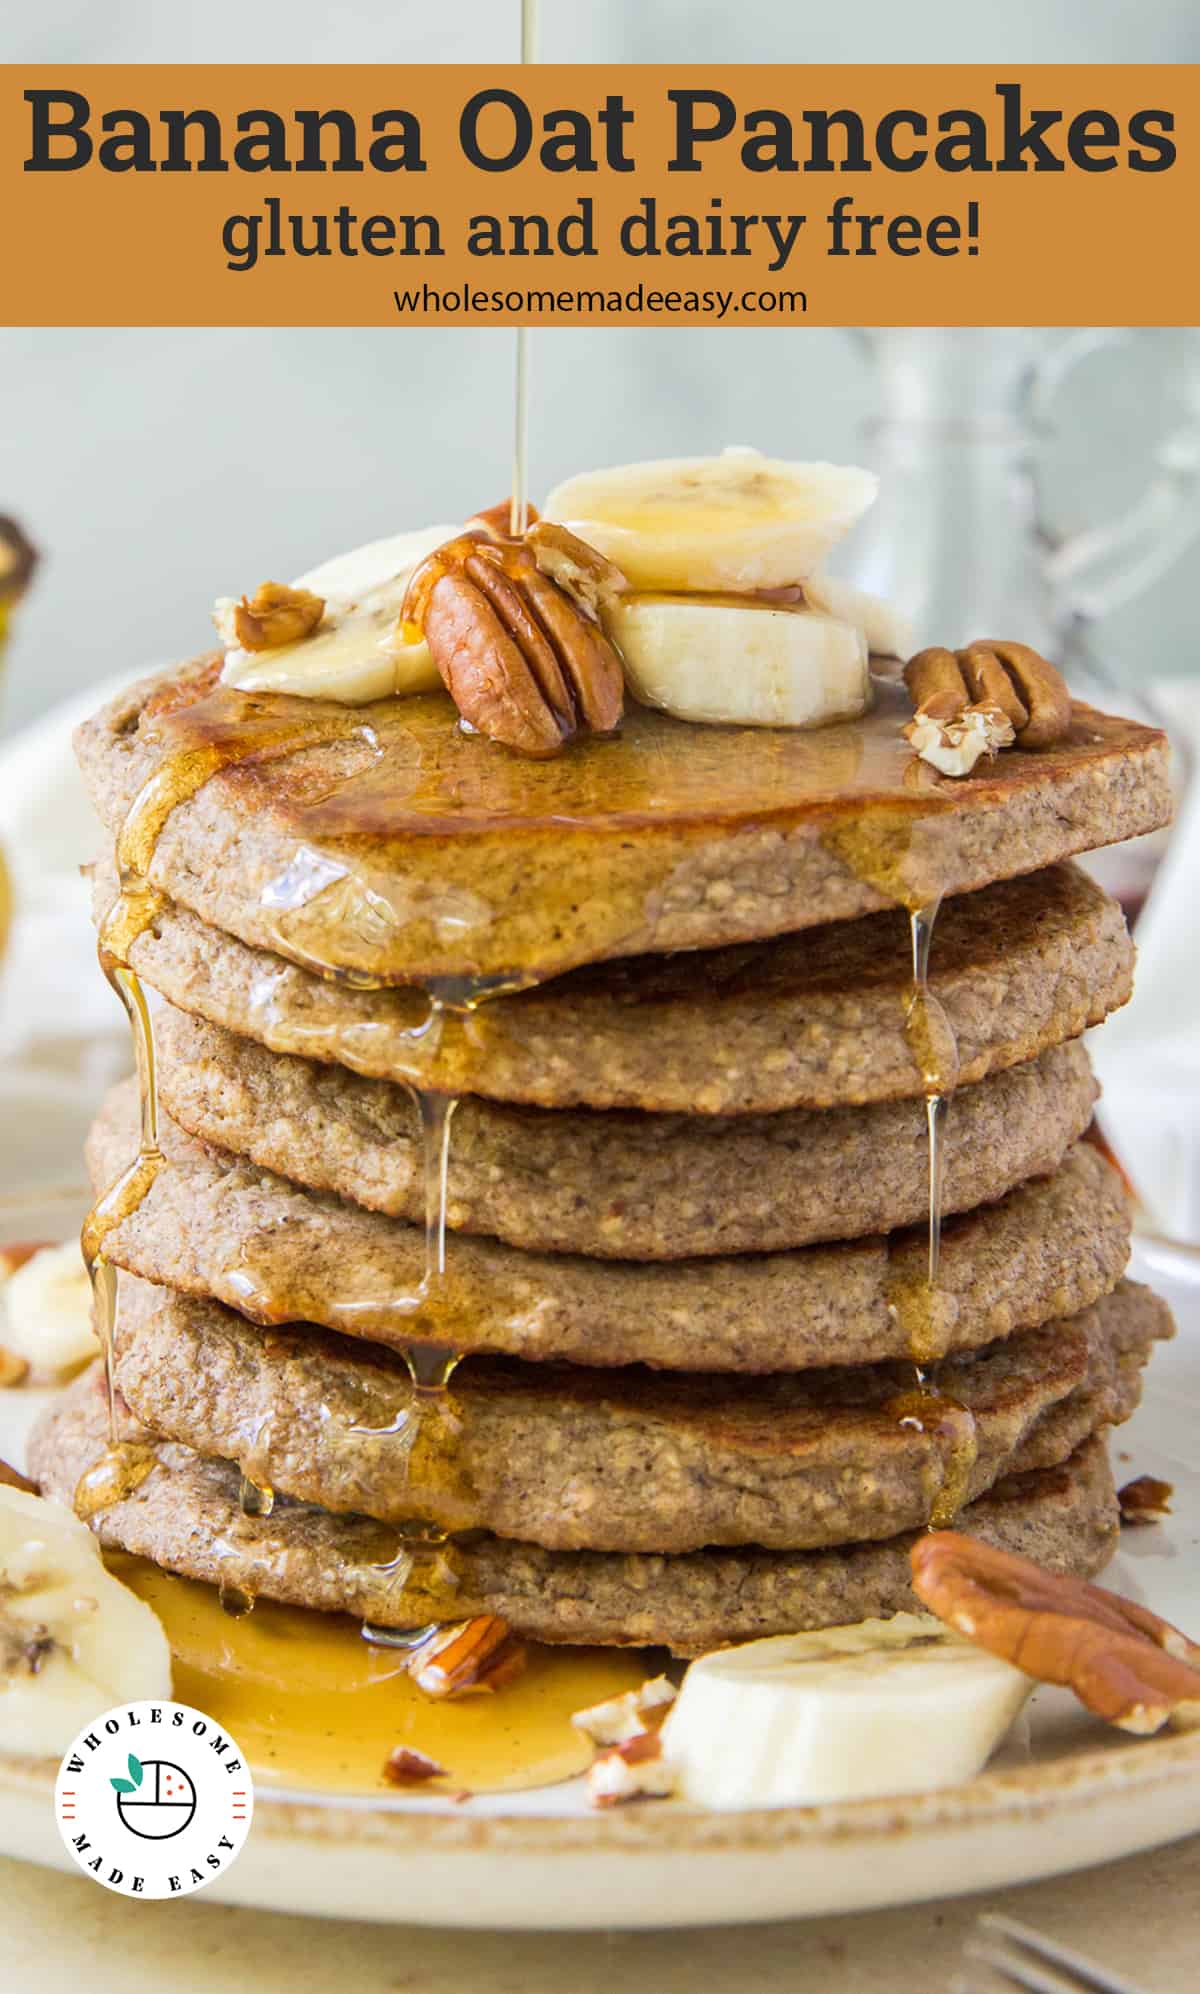 Maple syrup pours on to a stack of Banana Oat Pancakes with text overlay.